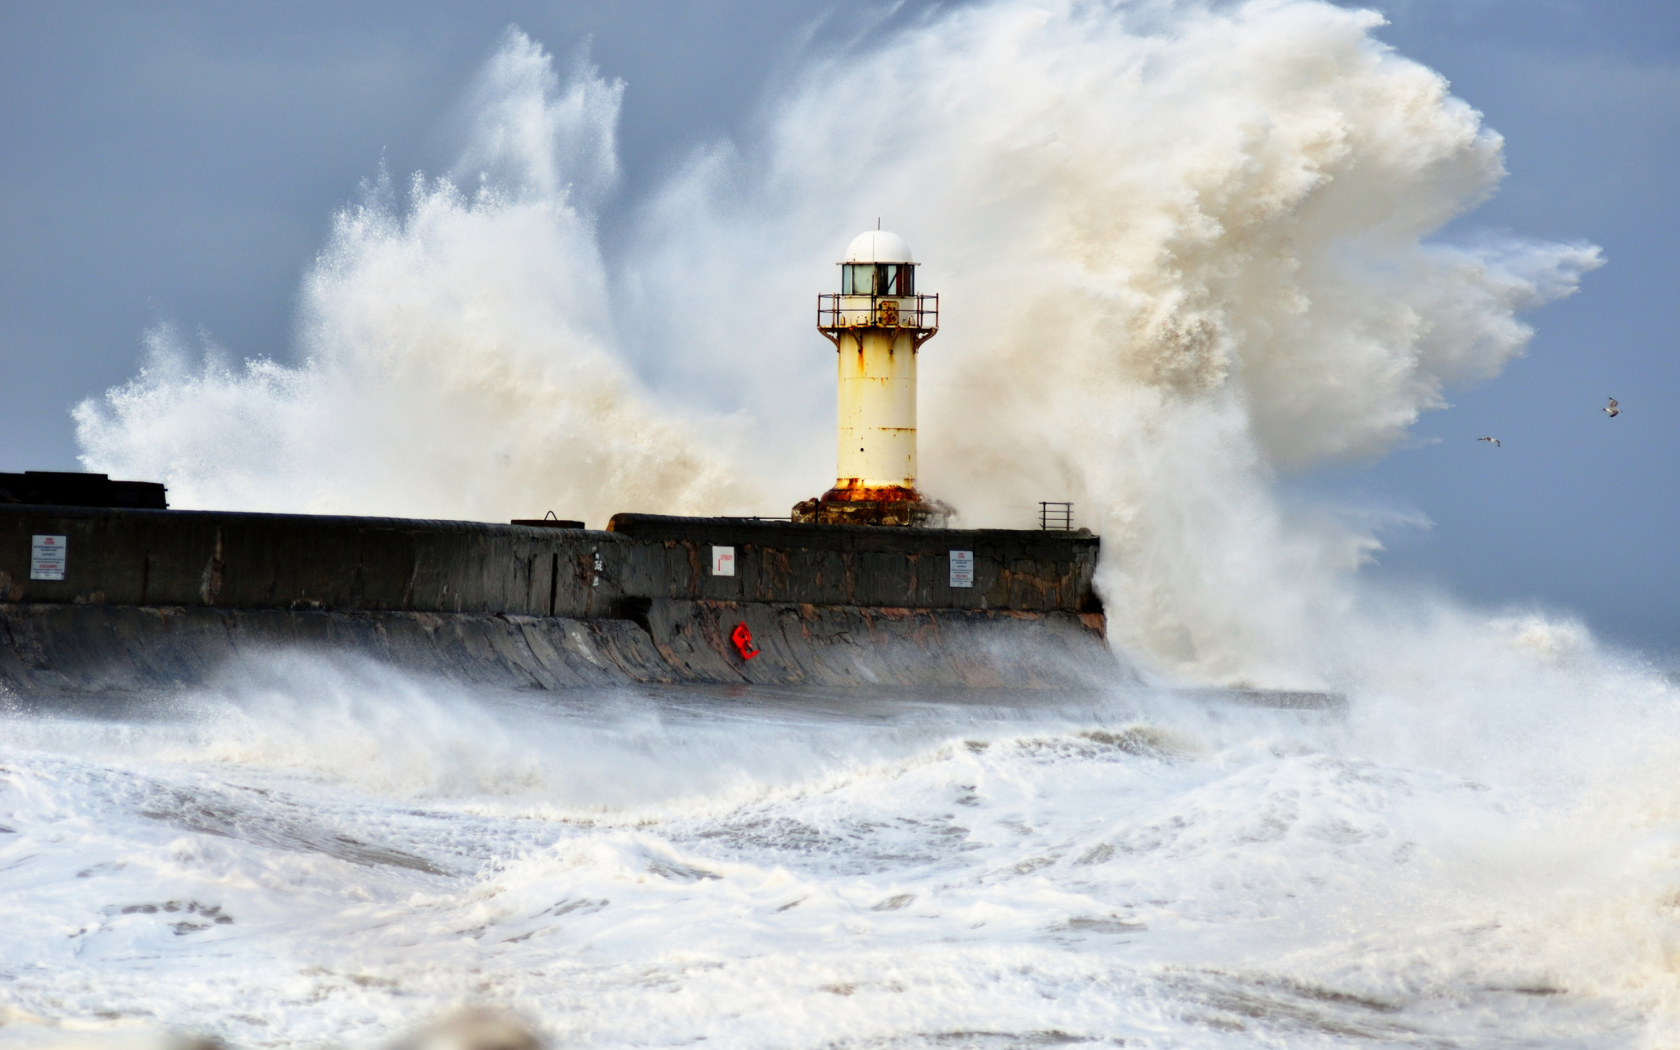 Crazy Storm And Old Lighthouse wallpaper 1680x1050